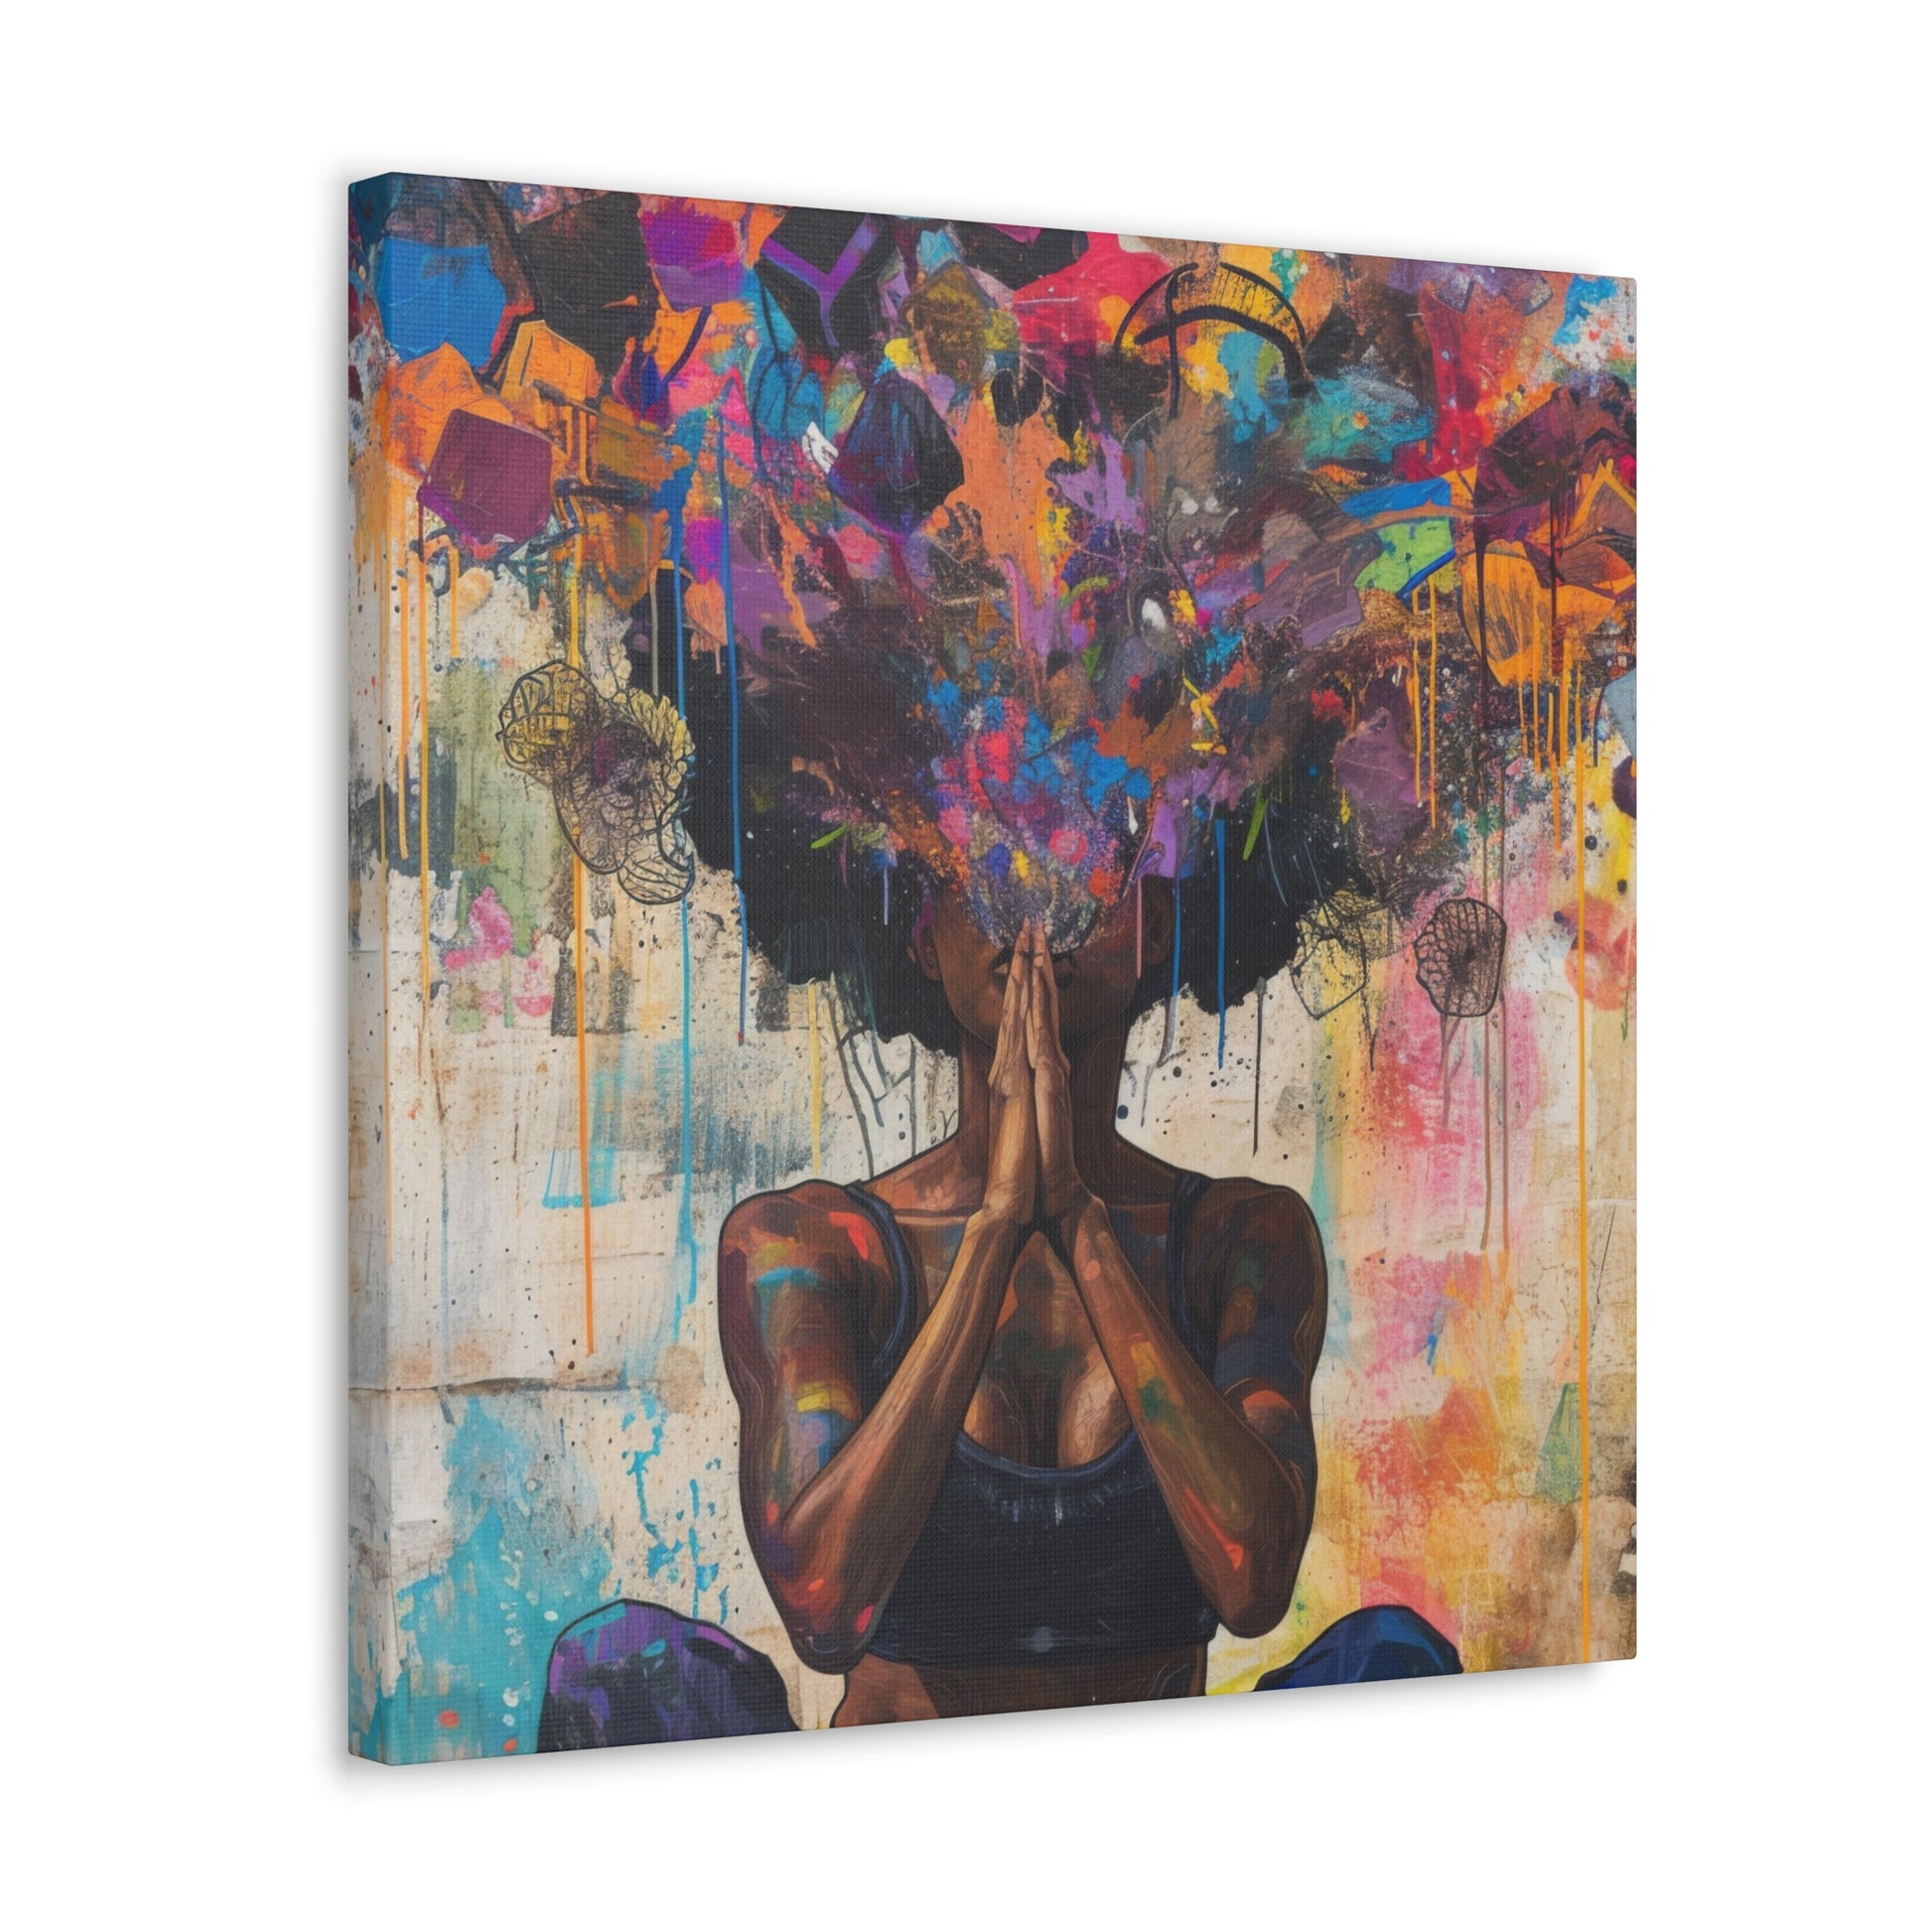 Abstract art of a woman in meditation, with a vibrant explosion of colorful shapes emanating from her head, symbolizing peaceful thoughts and creativity | EbMerized Creations